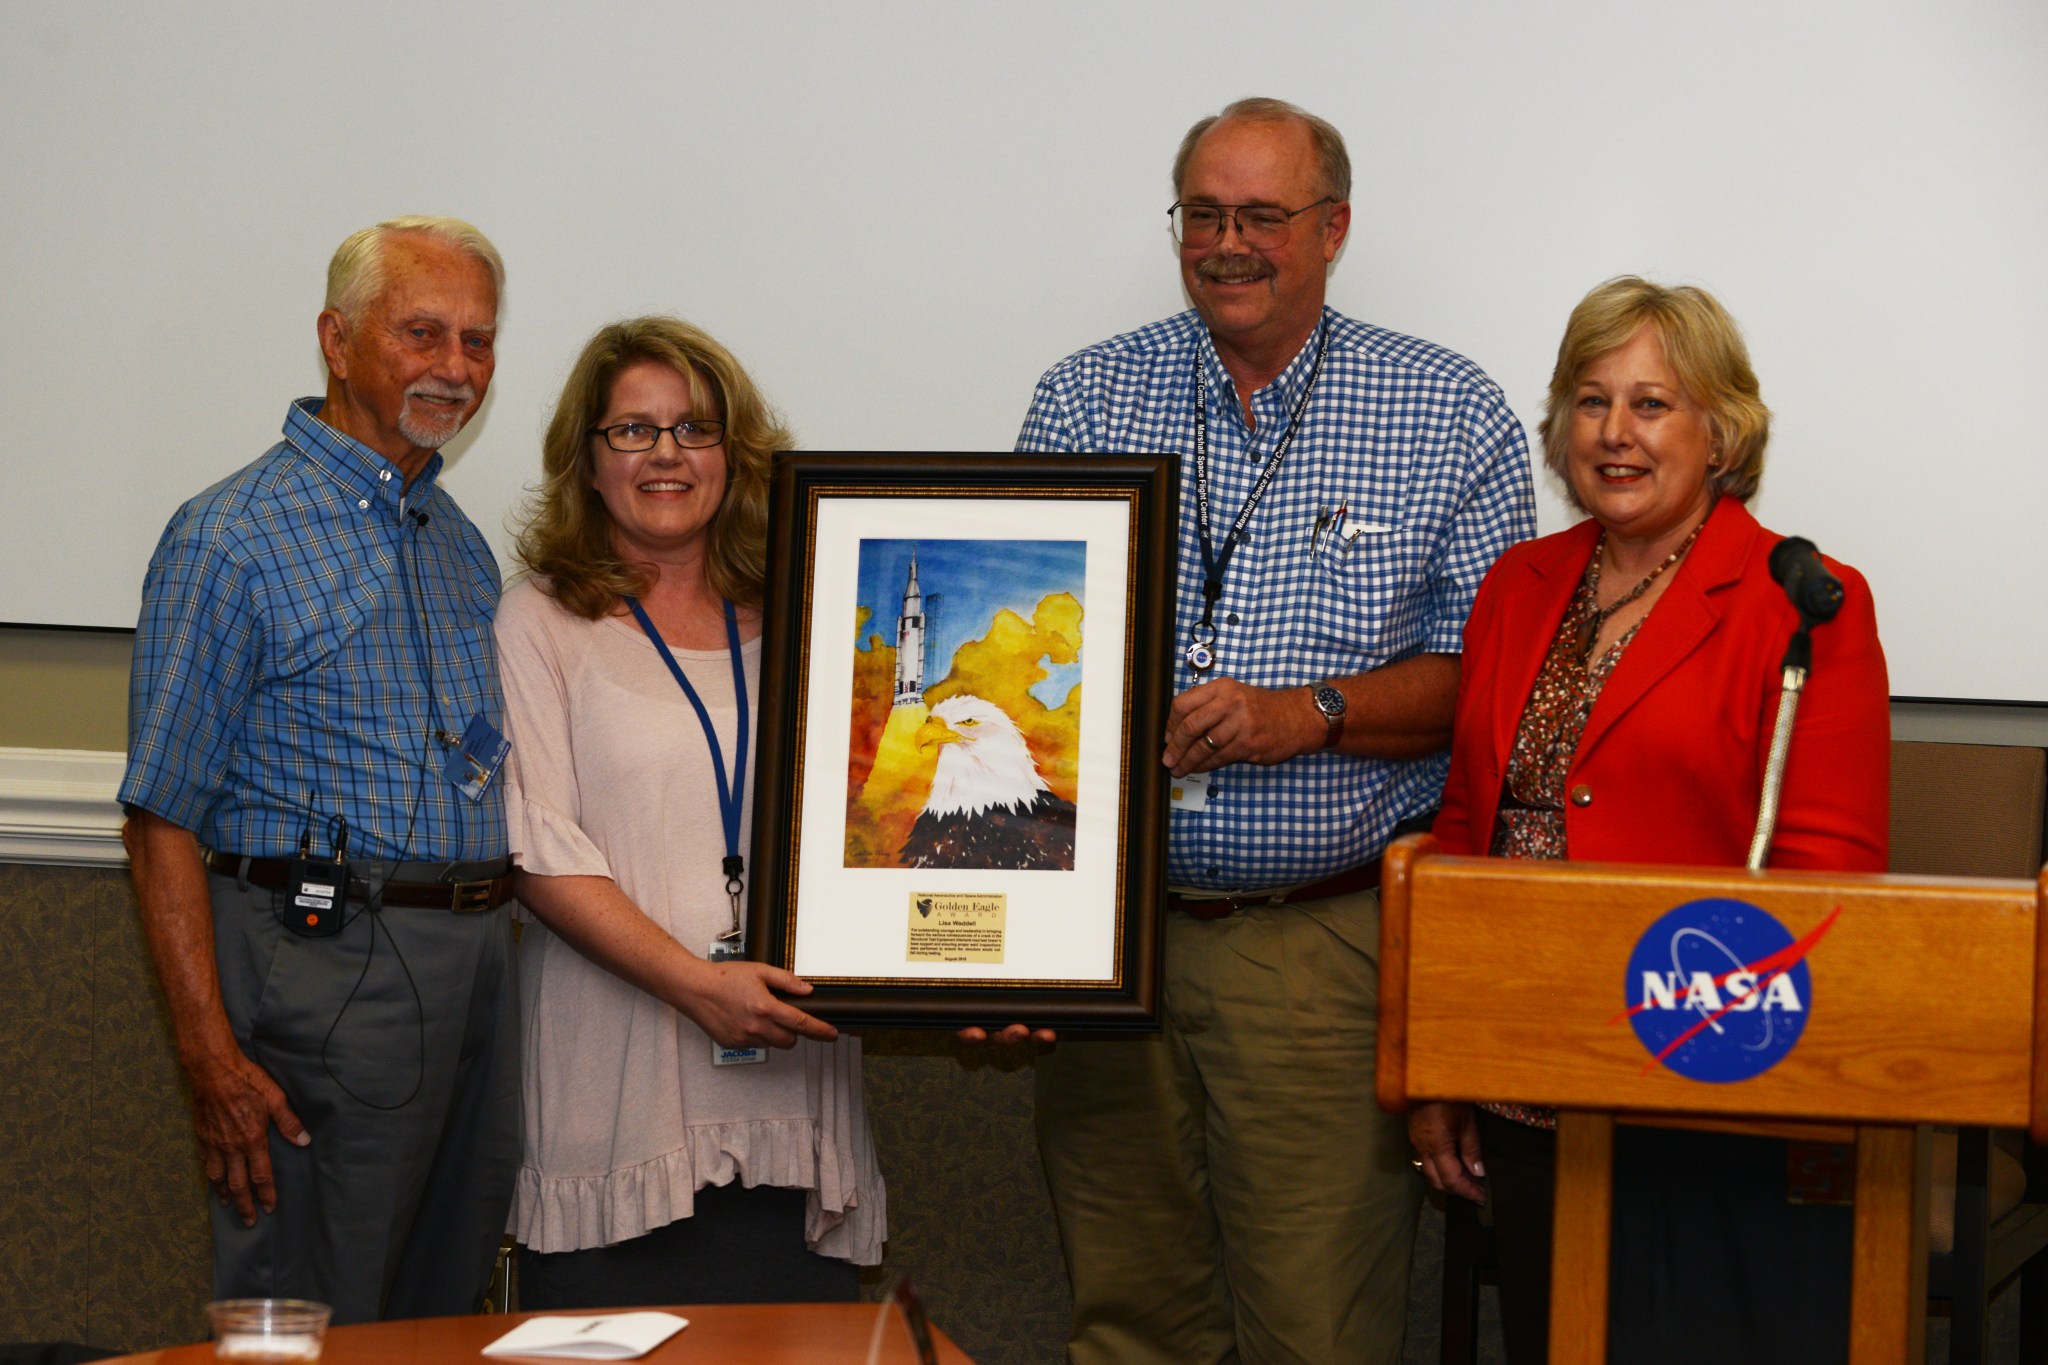 Lisa Waddell, second from left, is presented the Golden Eagle Award by SMA Director Rick Burt, second from right, and Jan Davis.